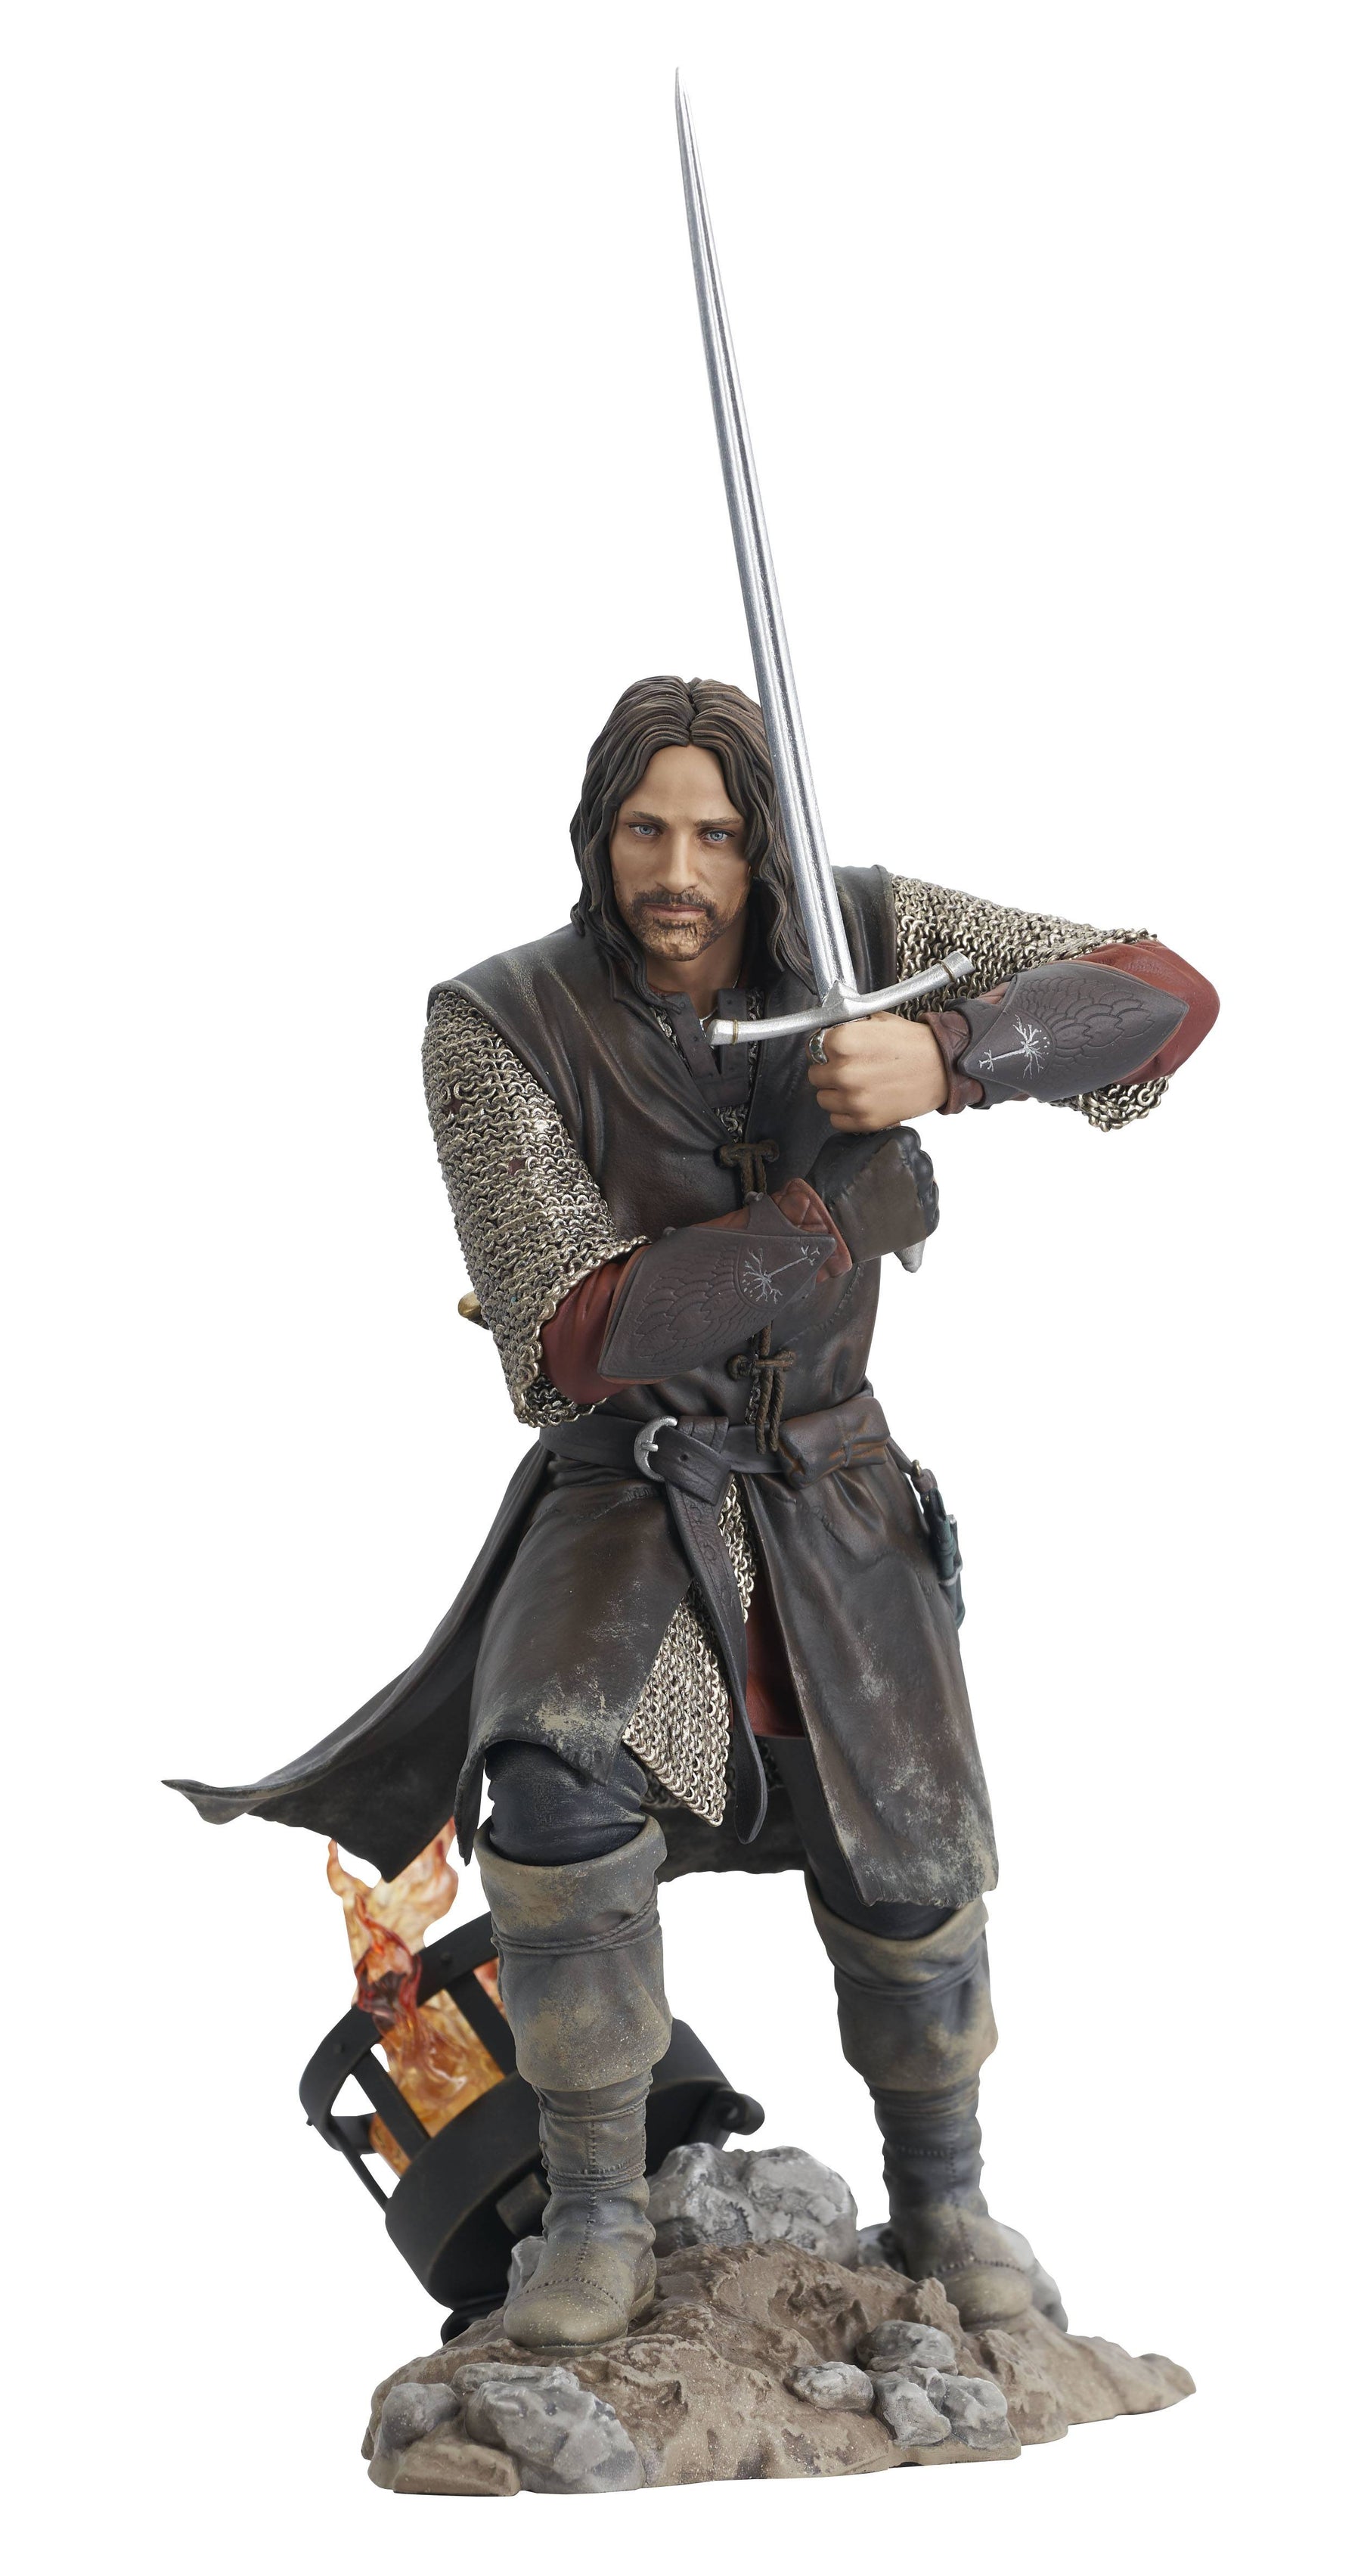 LORD OF THE RINGS GALLERY ARAGORN PVC STATUE (C: 1-1-2)